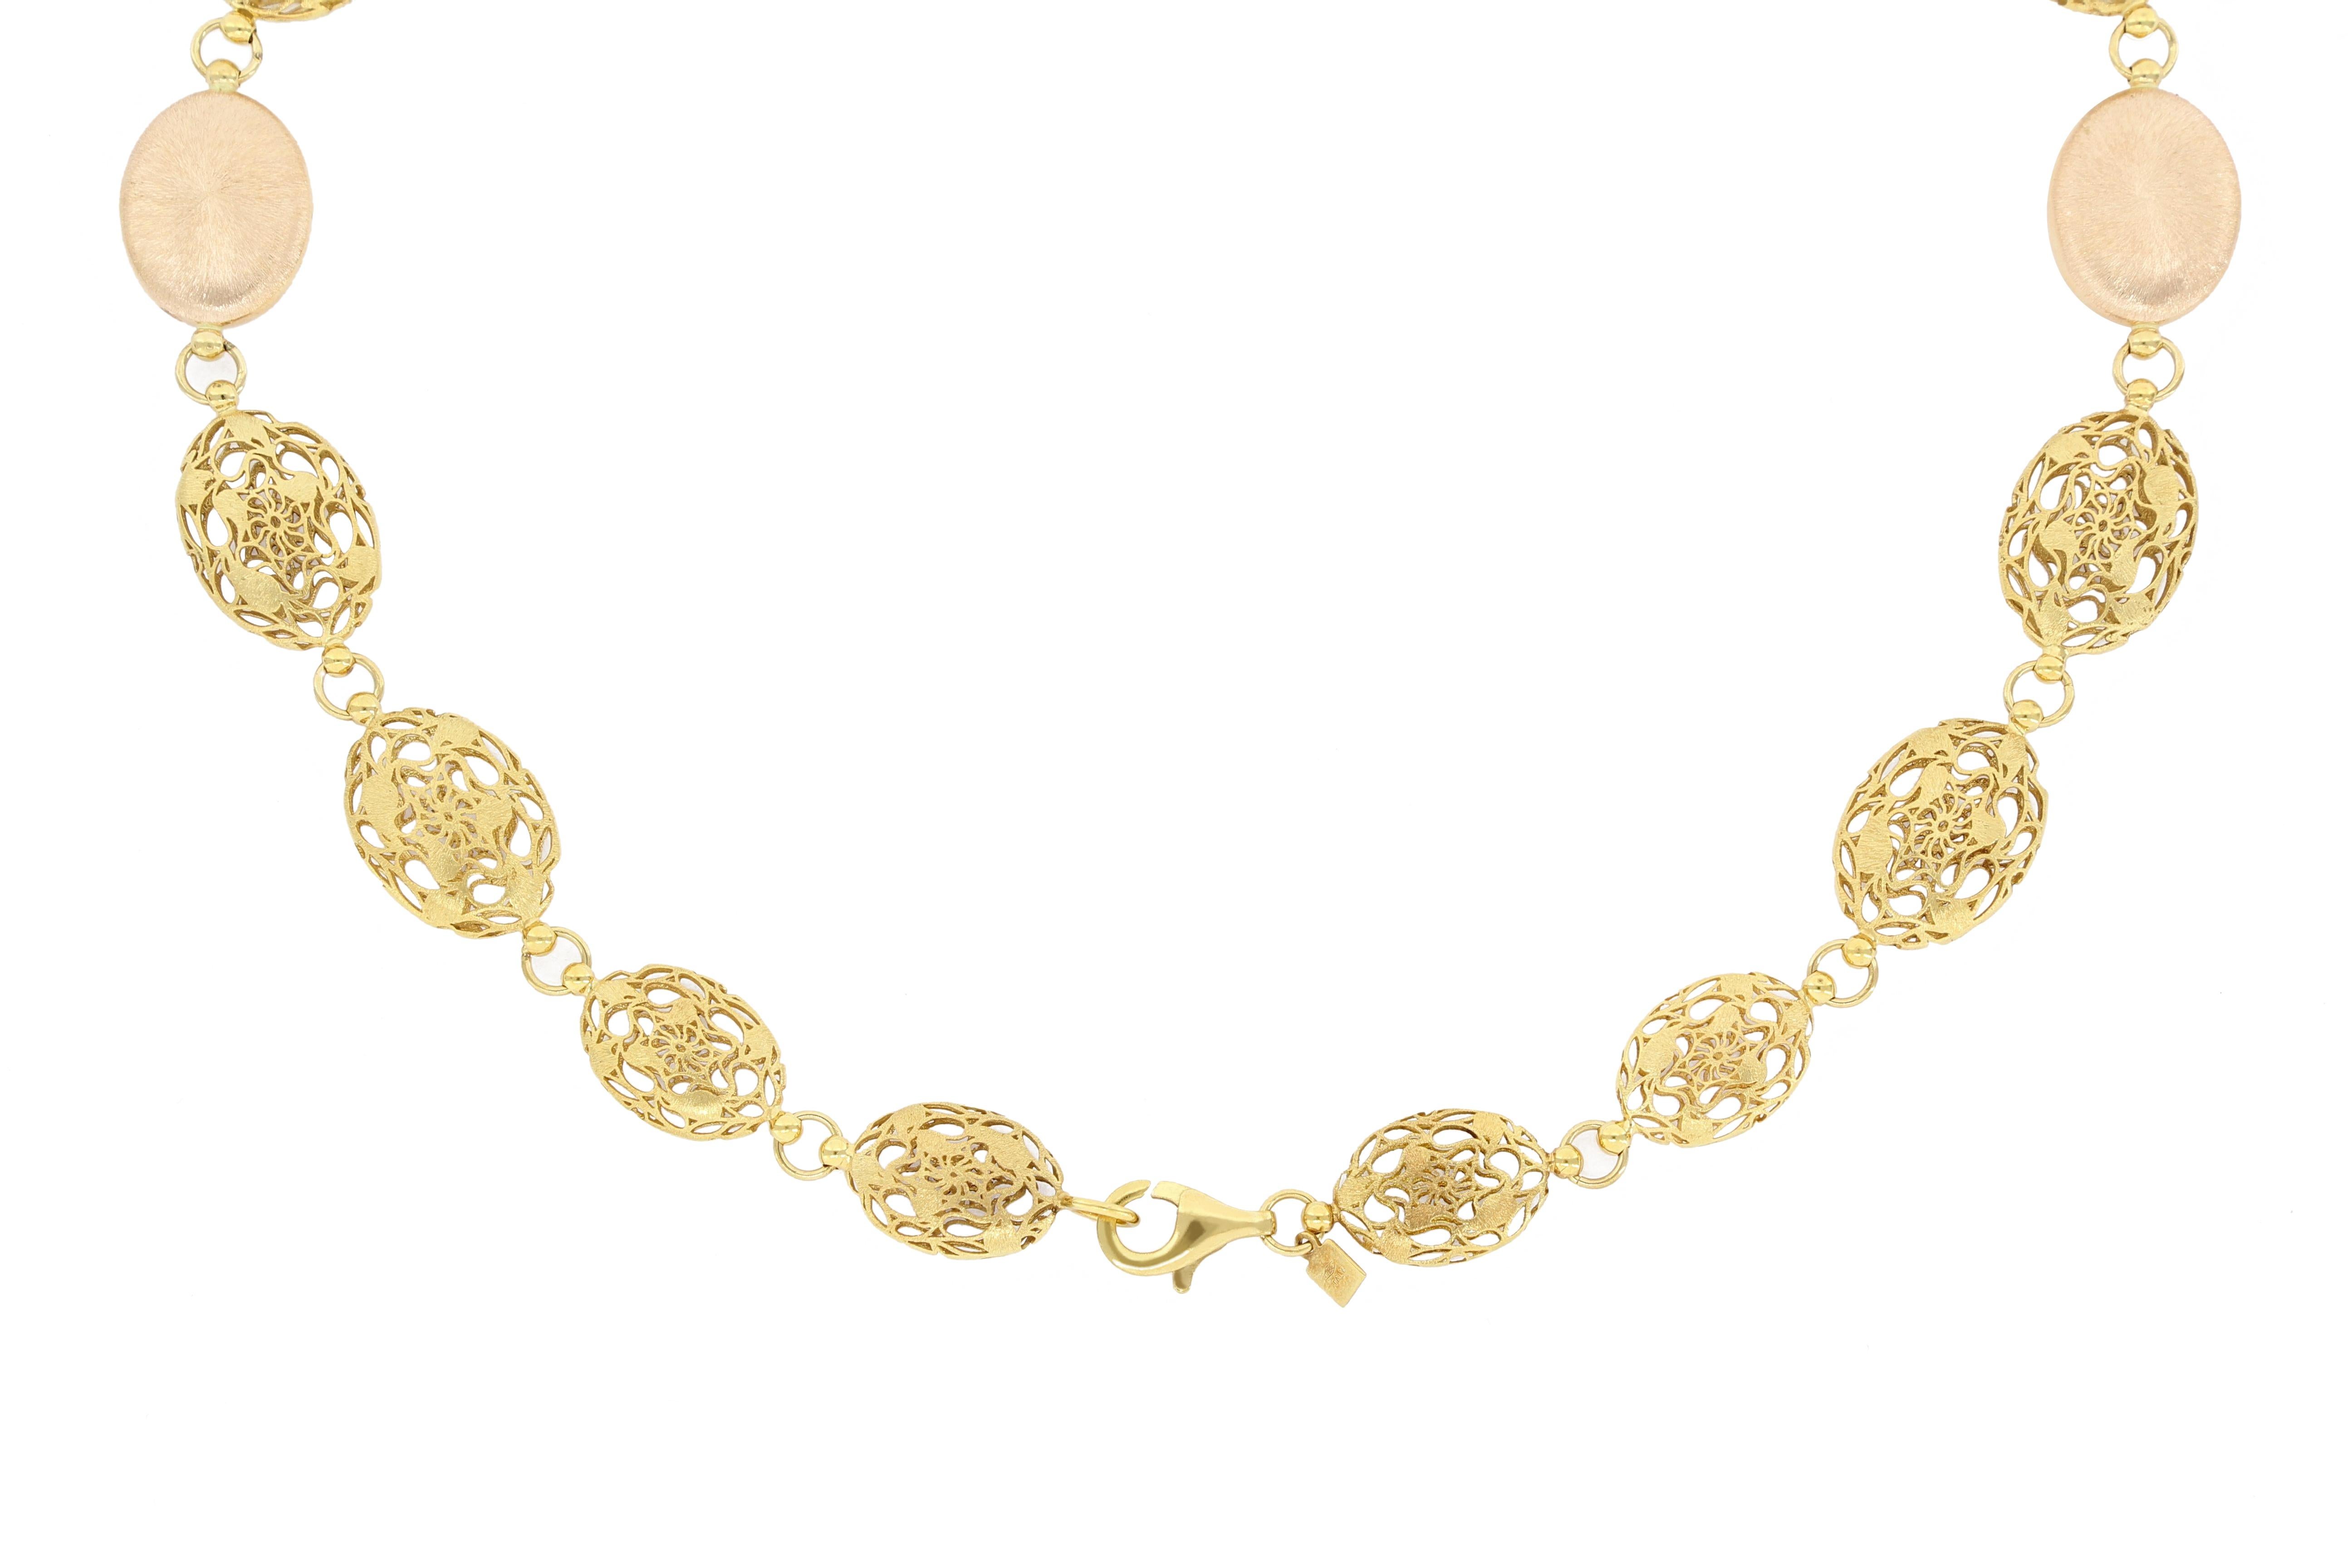 Italian 18K Gold Necklace with Superb Crasftsmanship In New Condition For Sale In Macau, MO